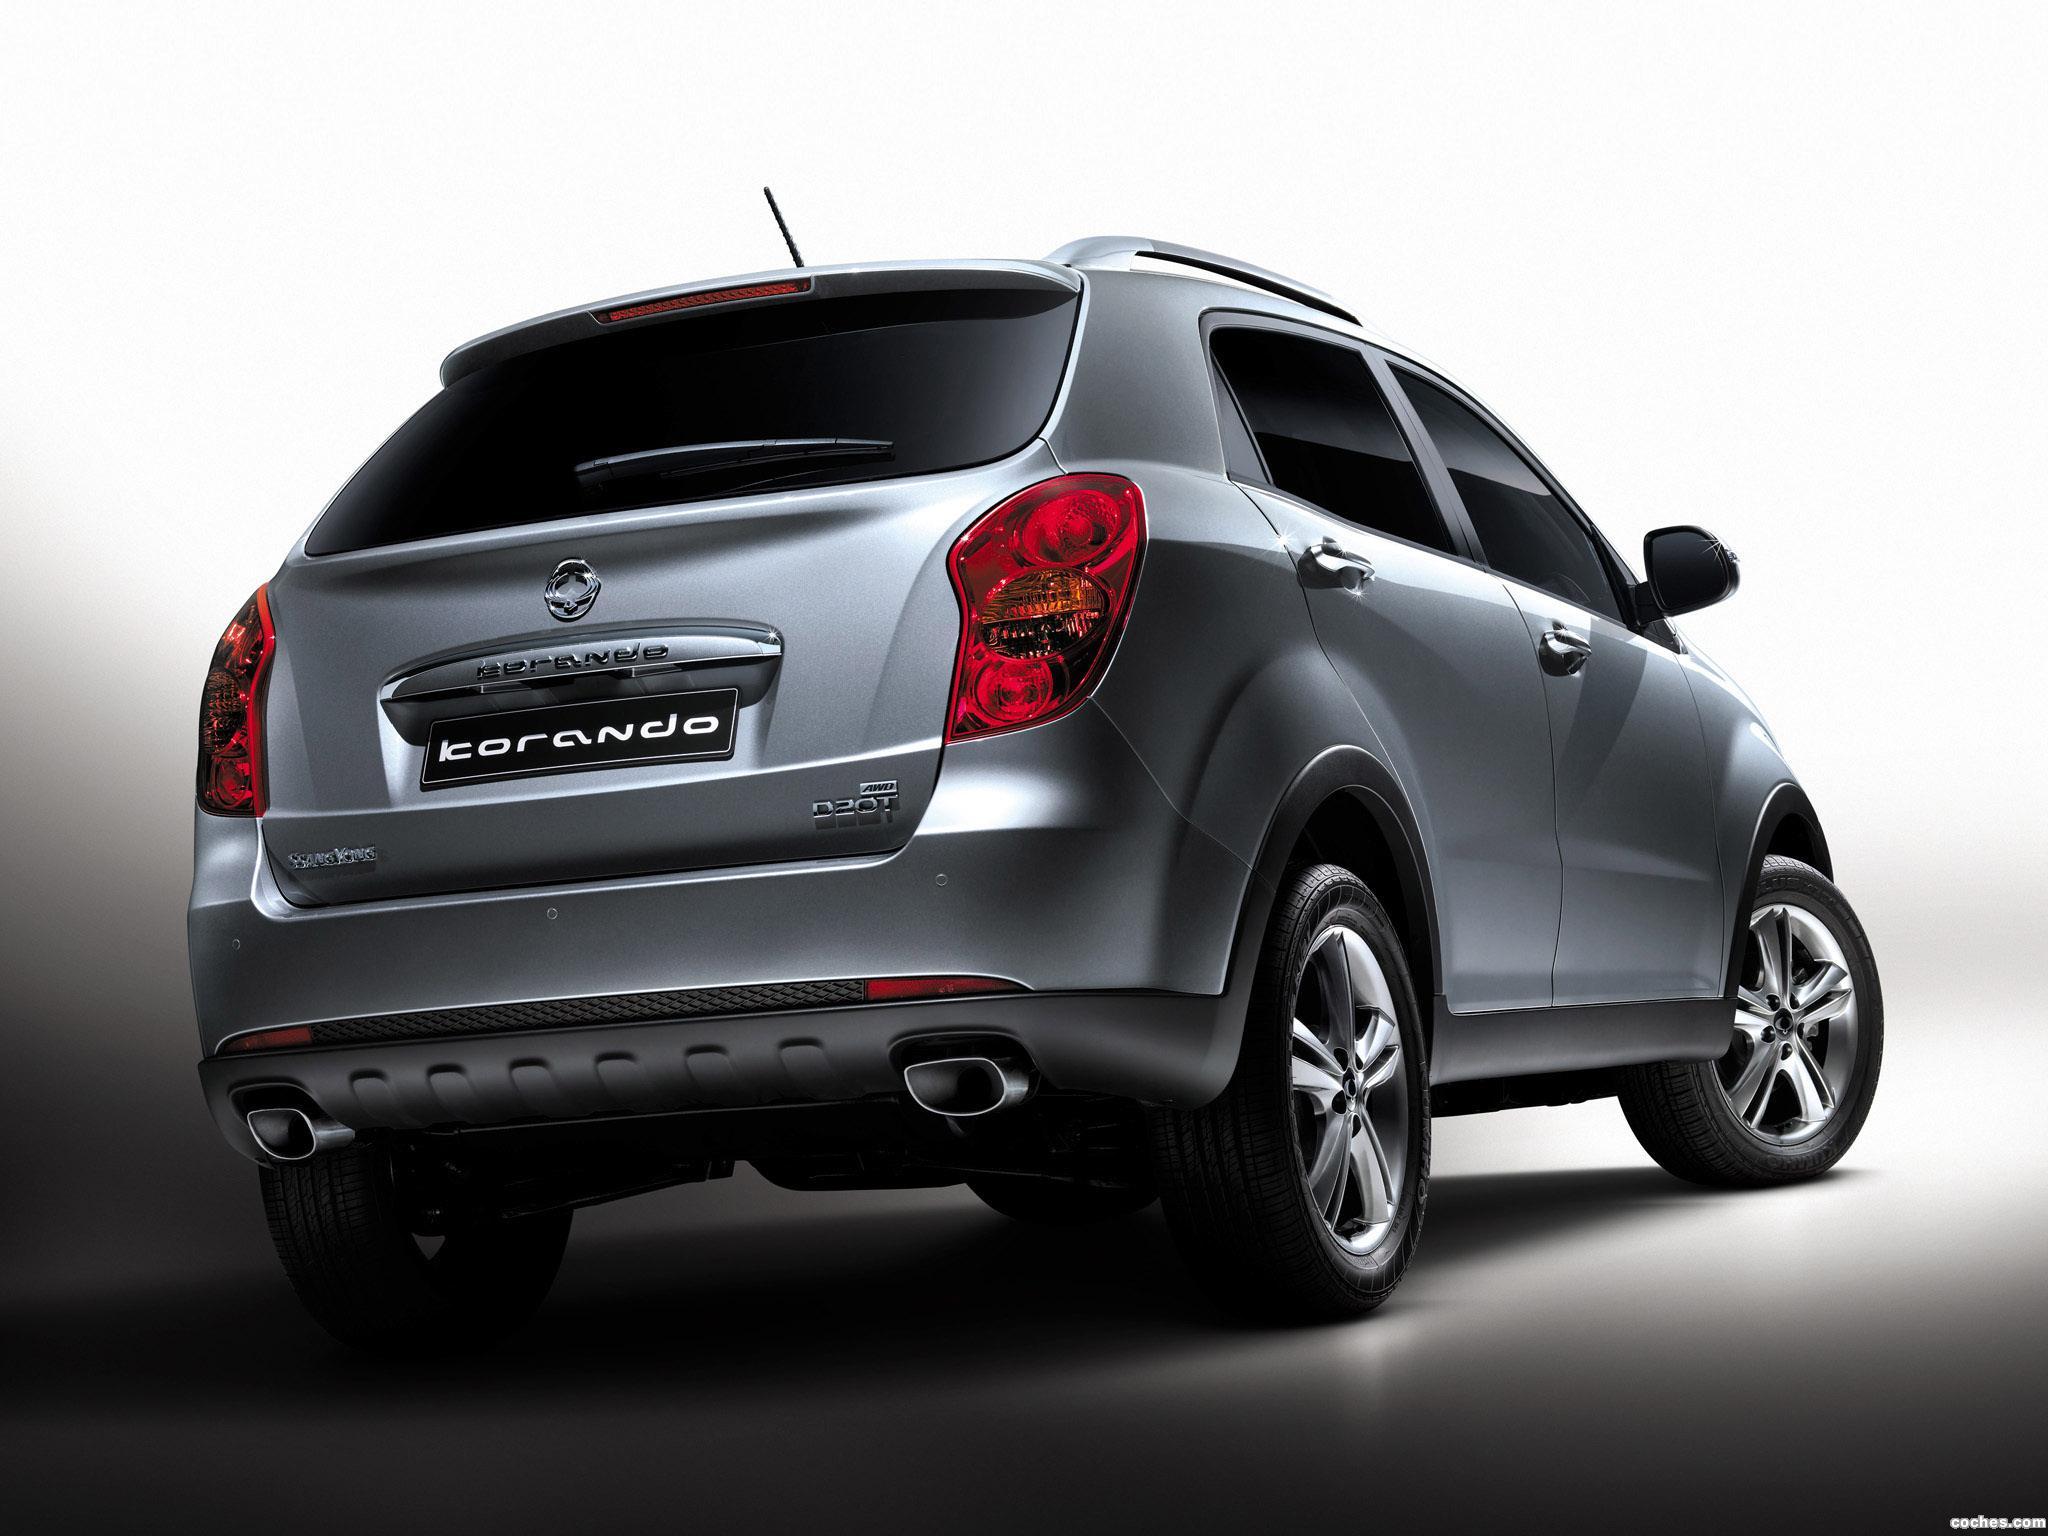 Санг енг форум. SSANGYONG Actyon New 2011. SSANGYONG Actyon Korando. SSANGYONG Actyon 3. SSANGYONG New Actyon 2013.